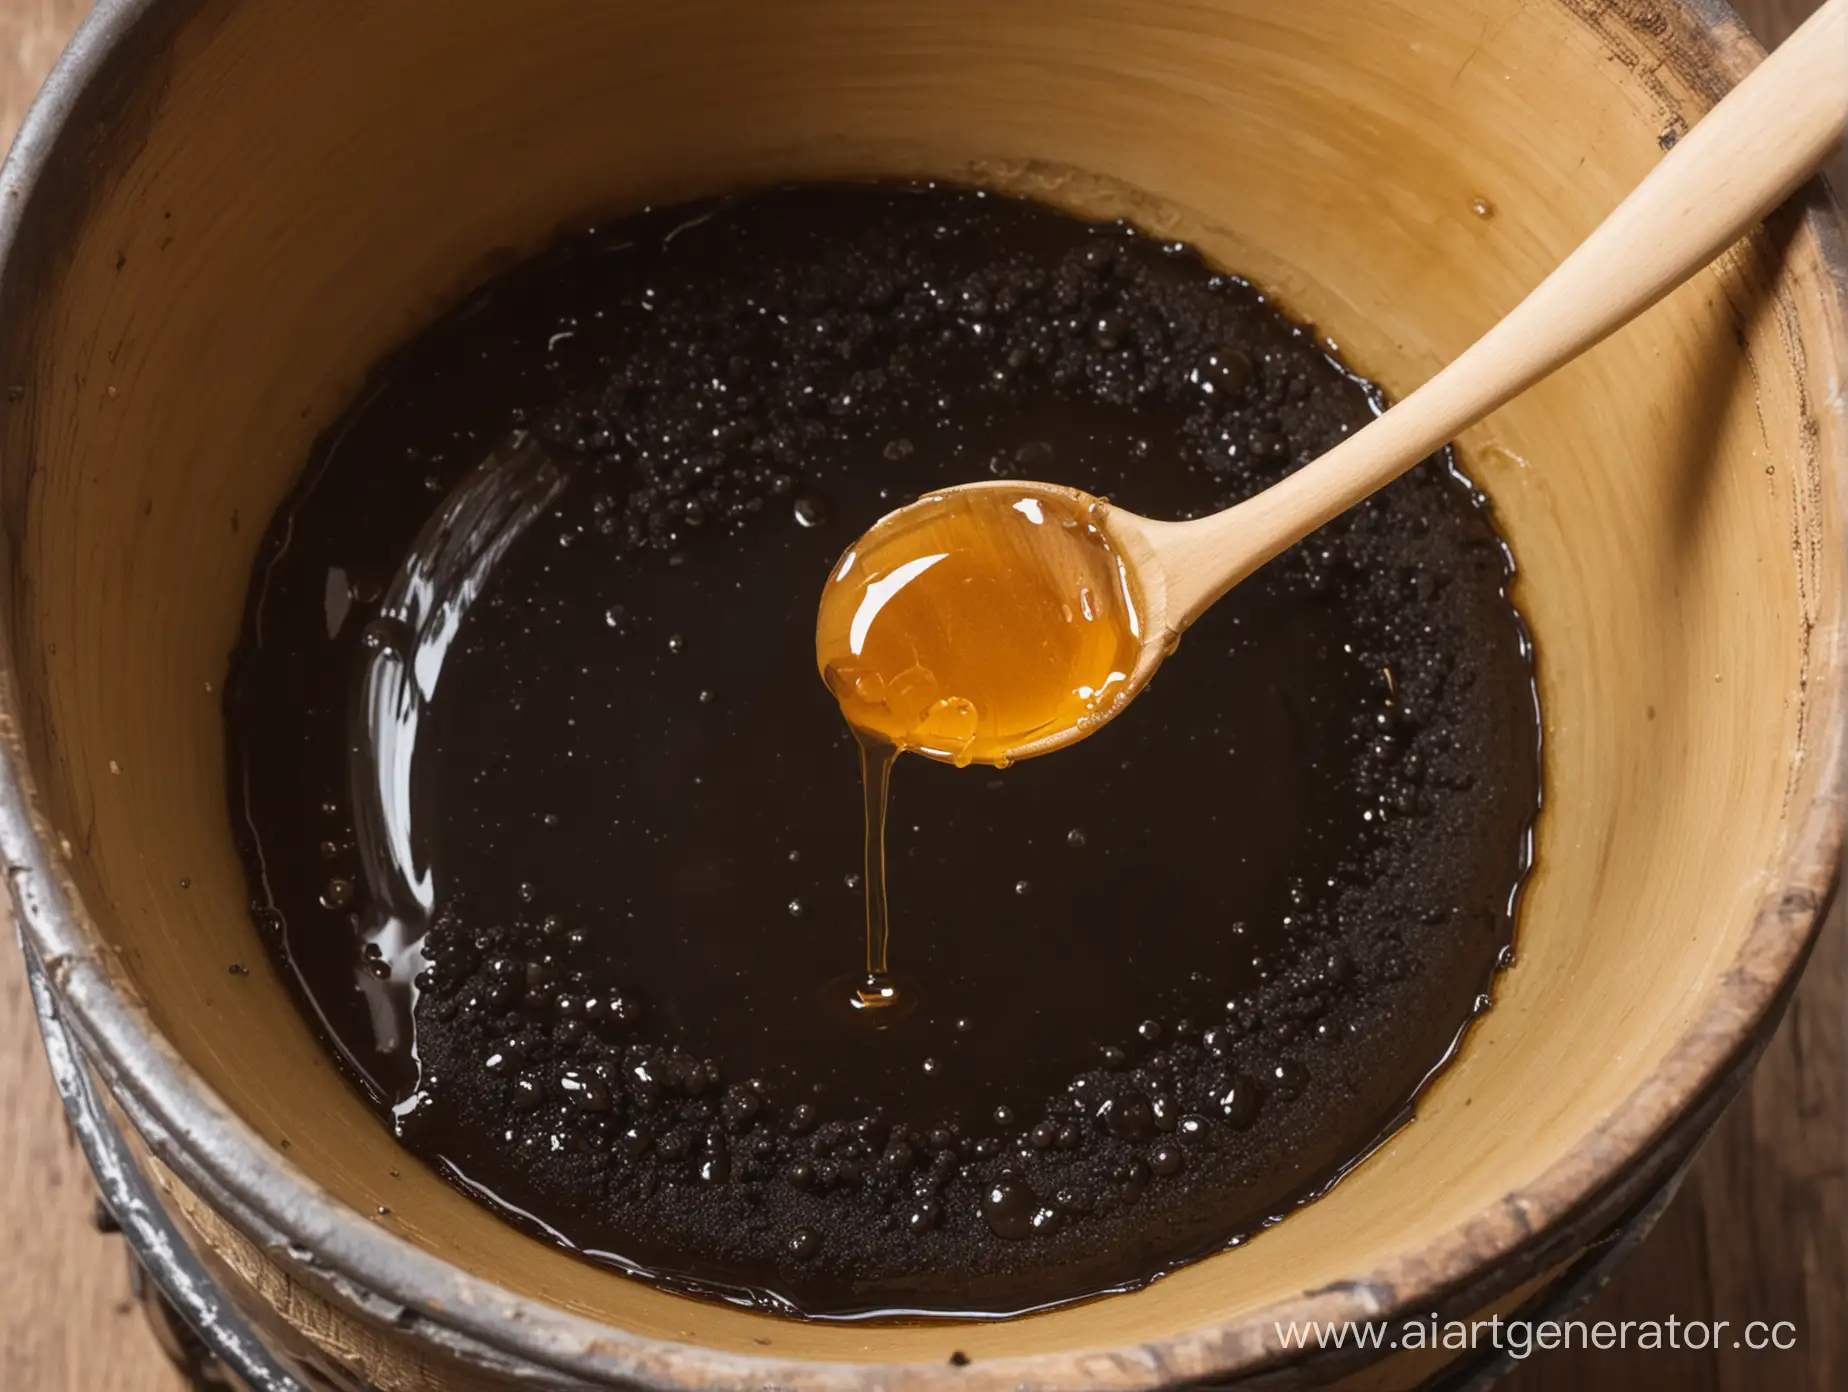 Contrasting-Textures-Spoonful-of-Tar-in-a-Barrel-of-Honey